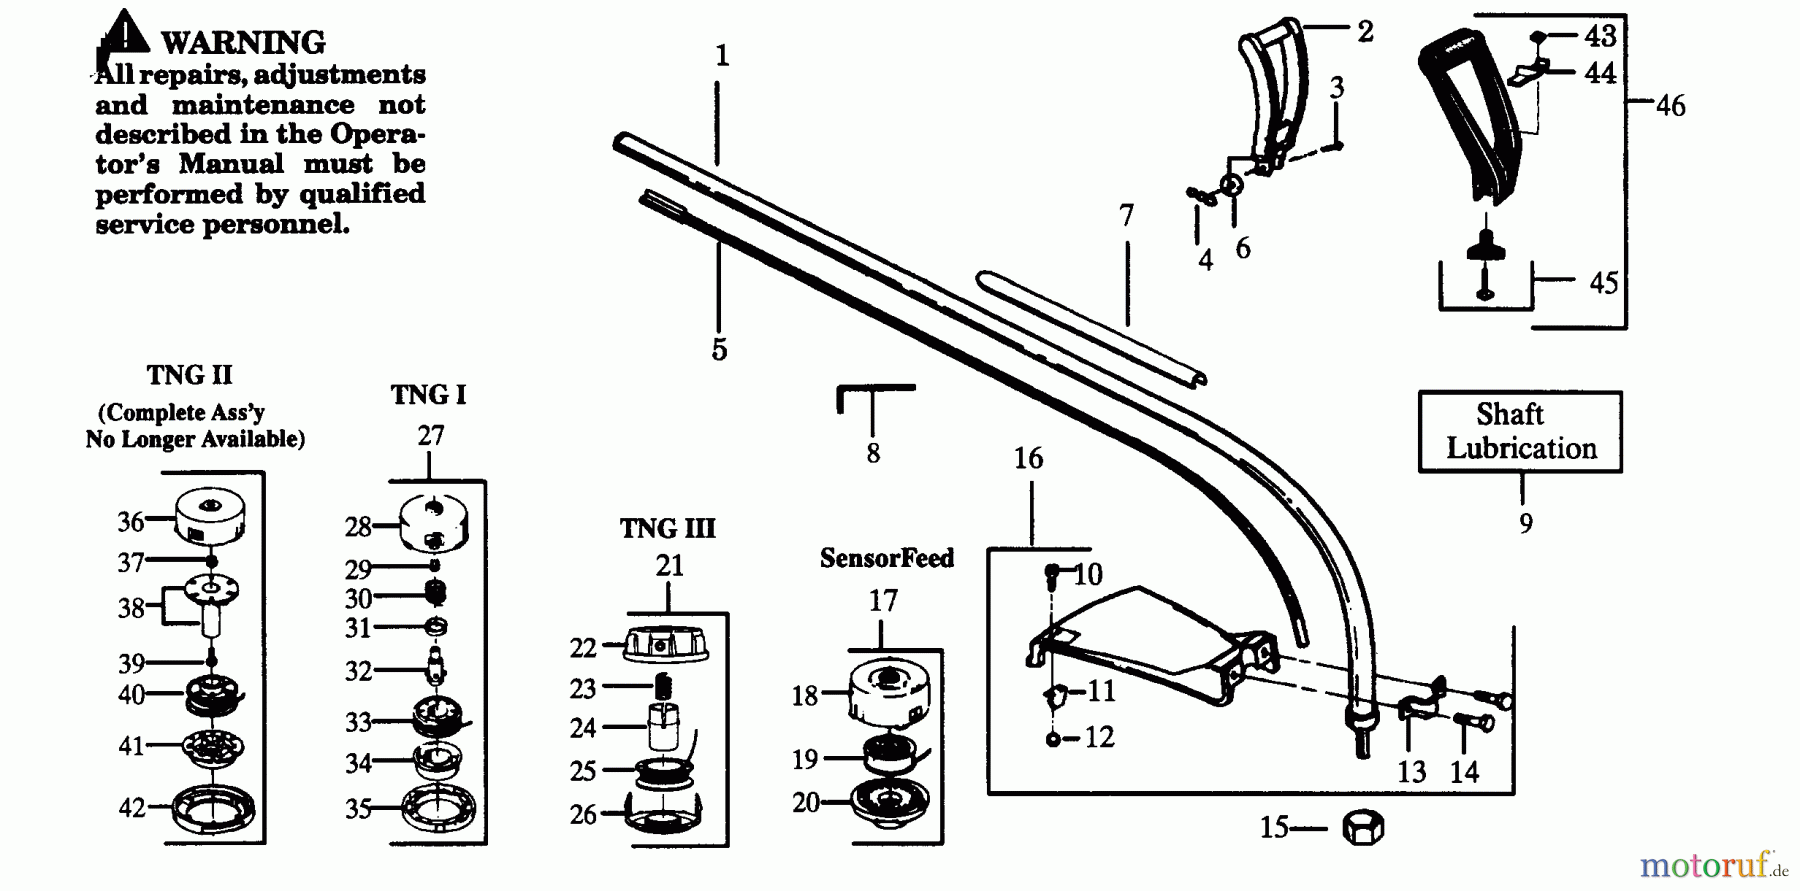  Poulan / Weed Eater Motorsensen, Trimmer GTI17 - Weed Eater String Trimmer DRIVE SHAFT & CUTTING HEAD